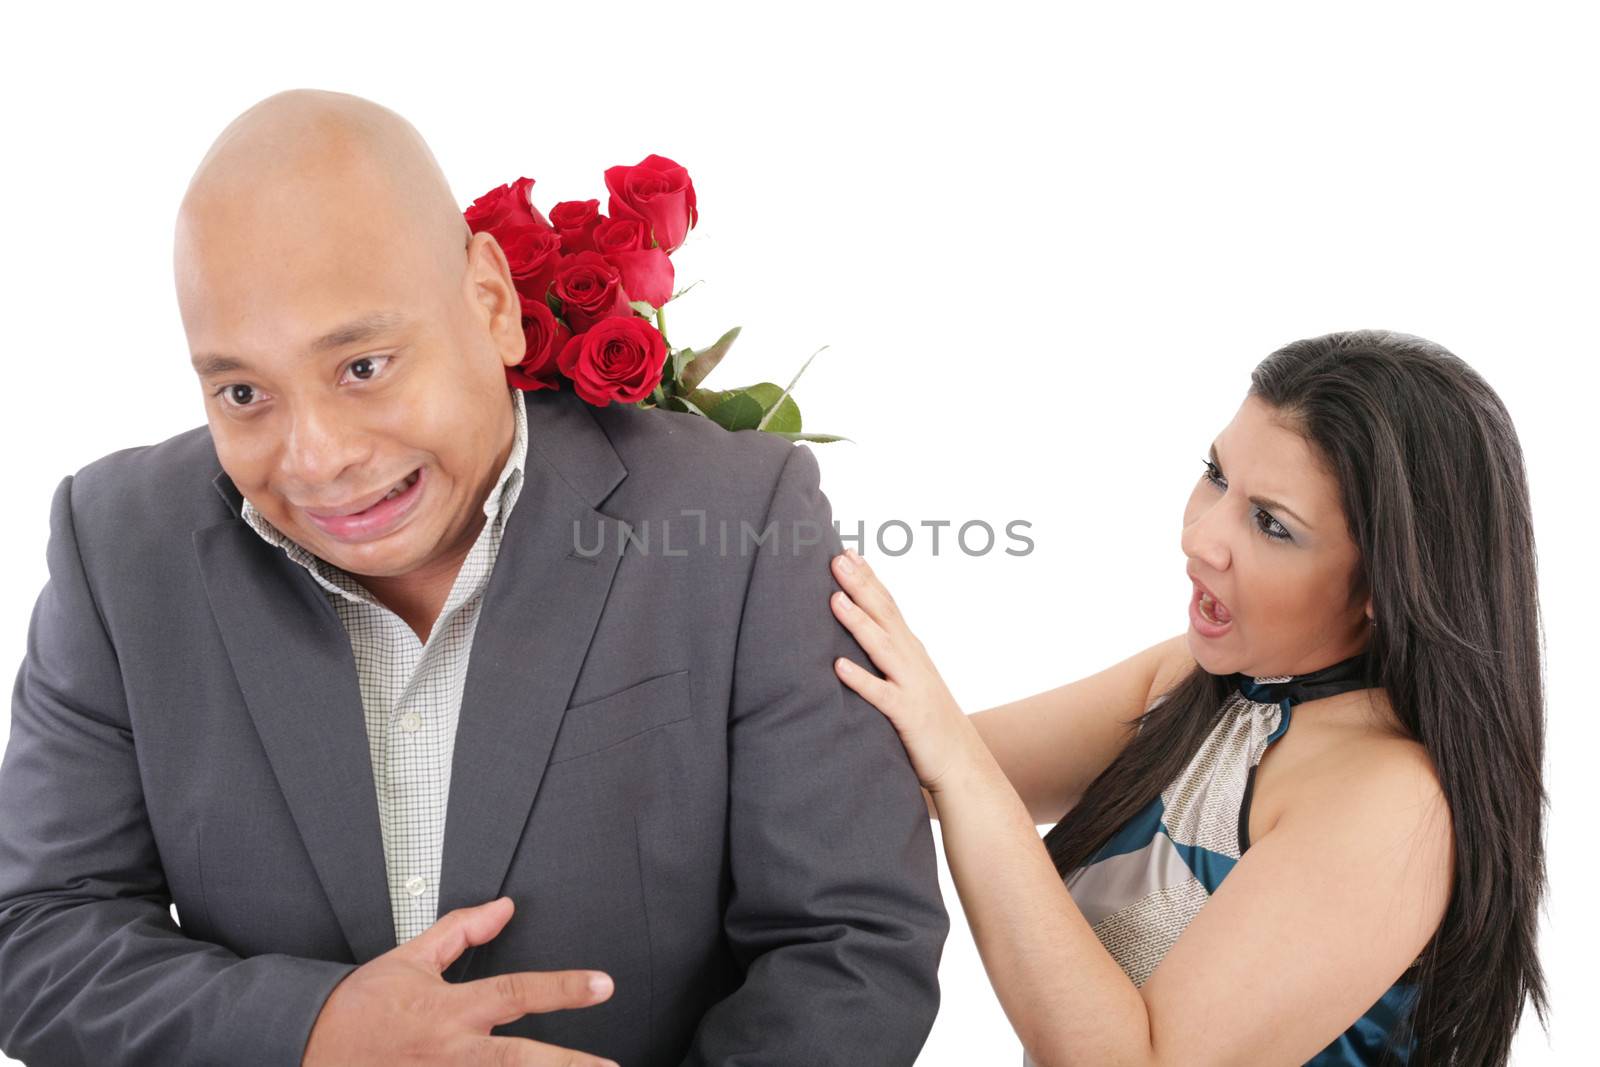 Woman striking his boysfriend with a bouquet of red roses. Focus on the woman.